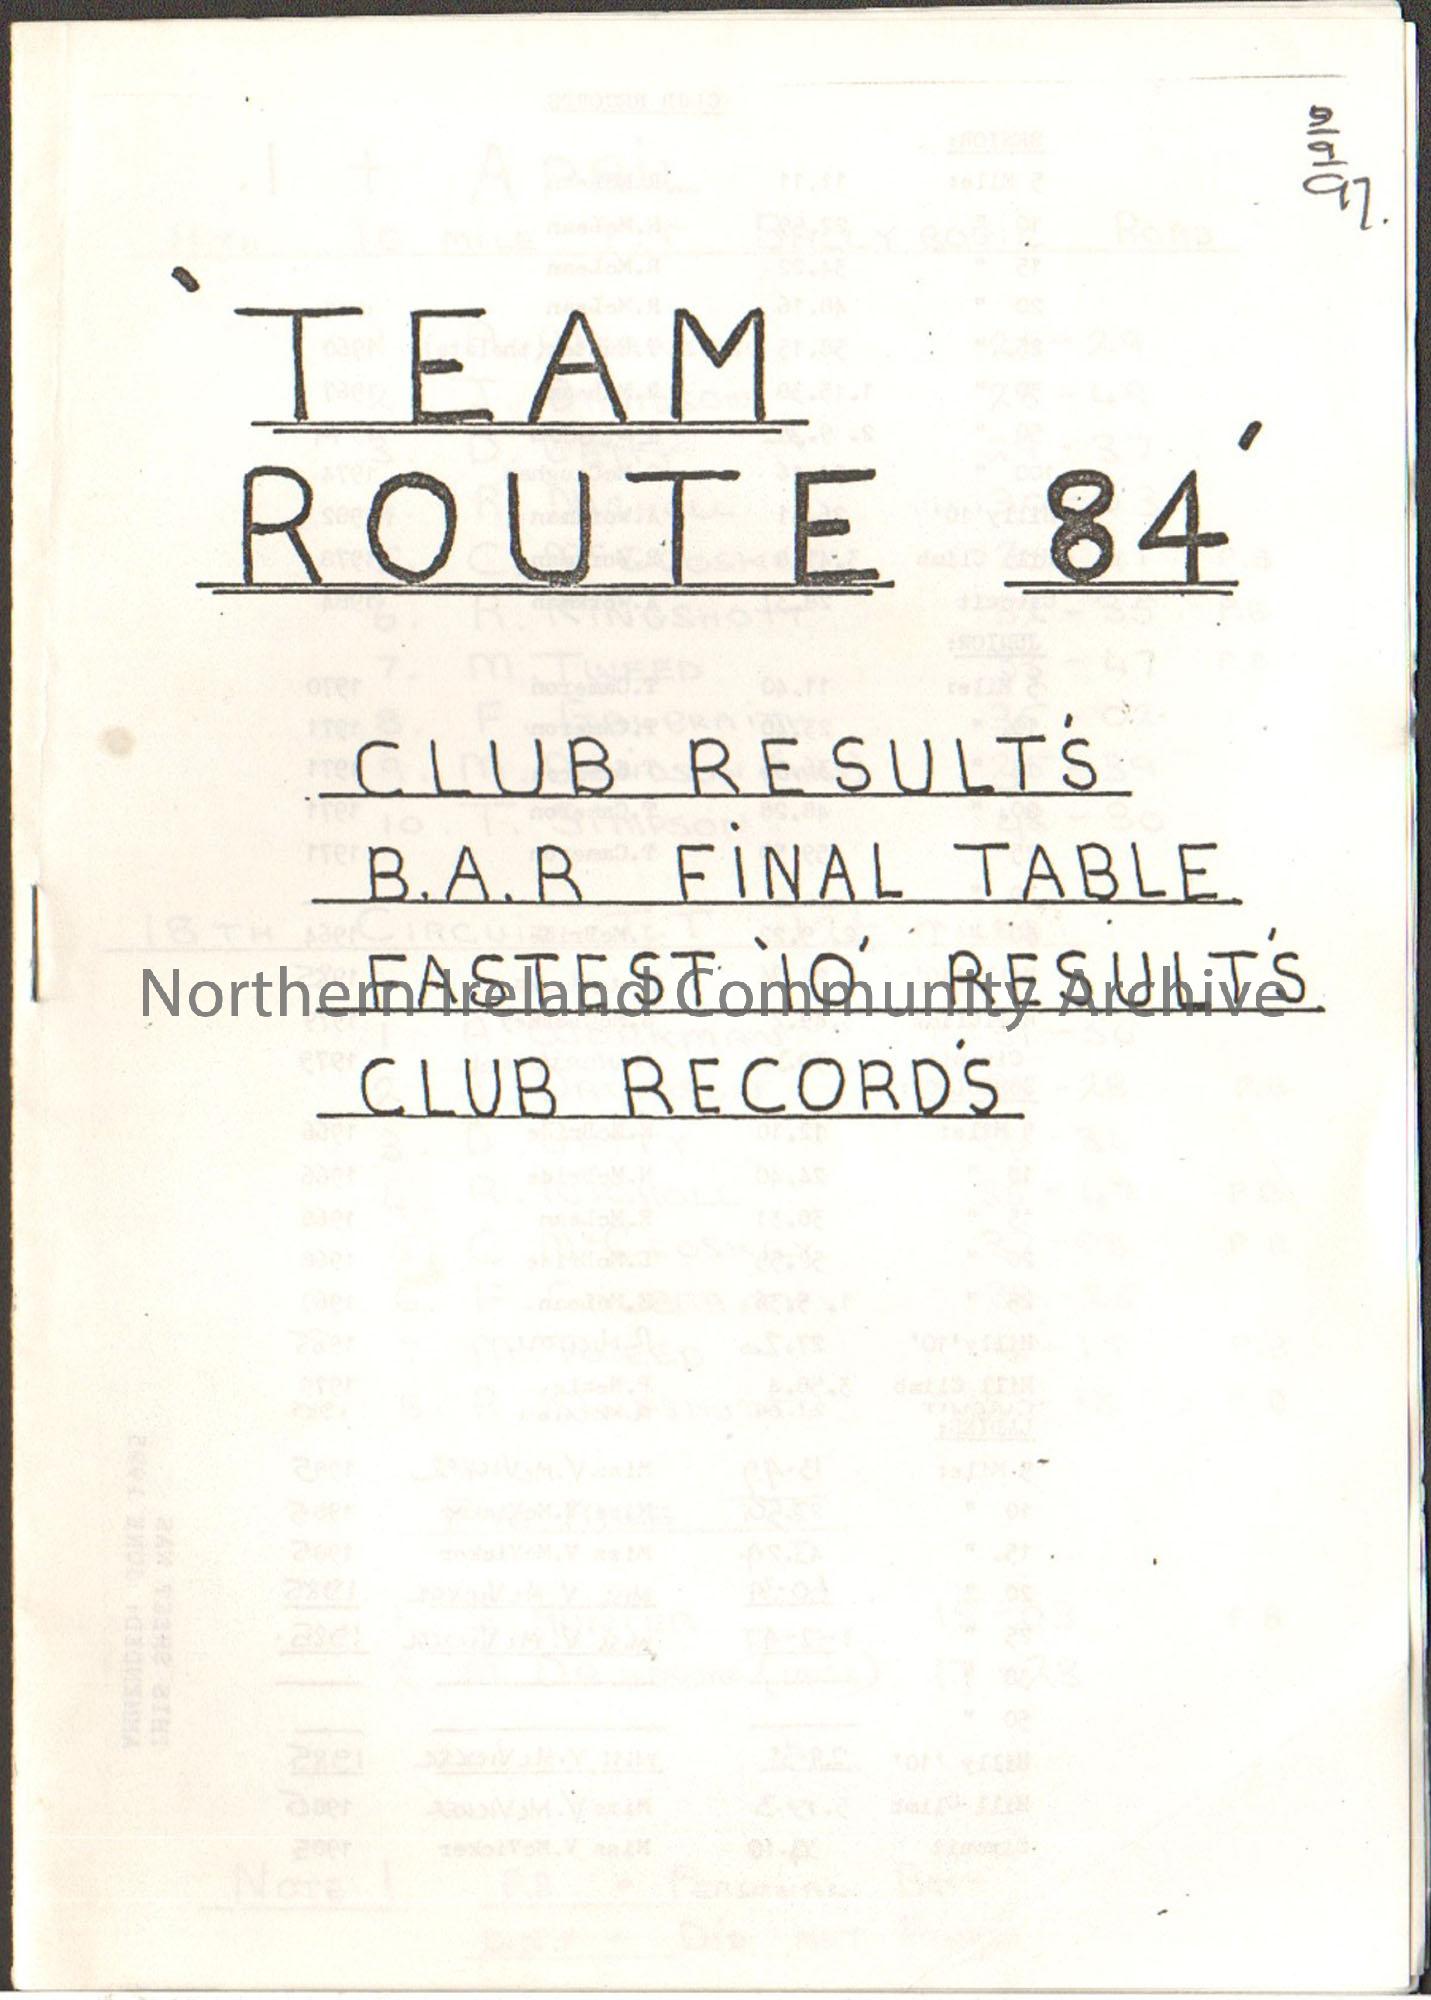 Team Route 84. Club results, B.A.R Final Table, Fastest ’10’ Results, Club Records. White booklet.